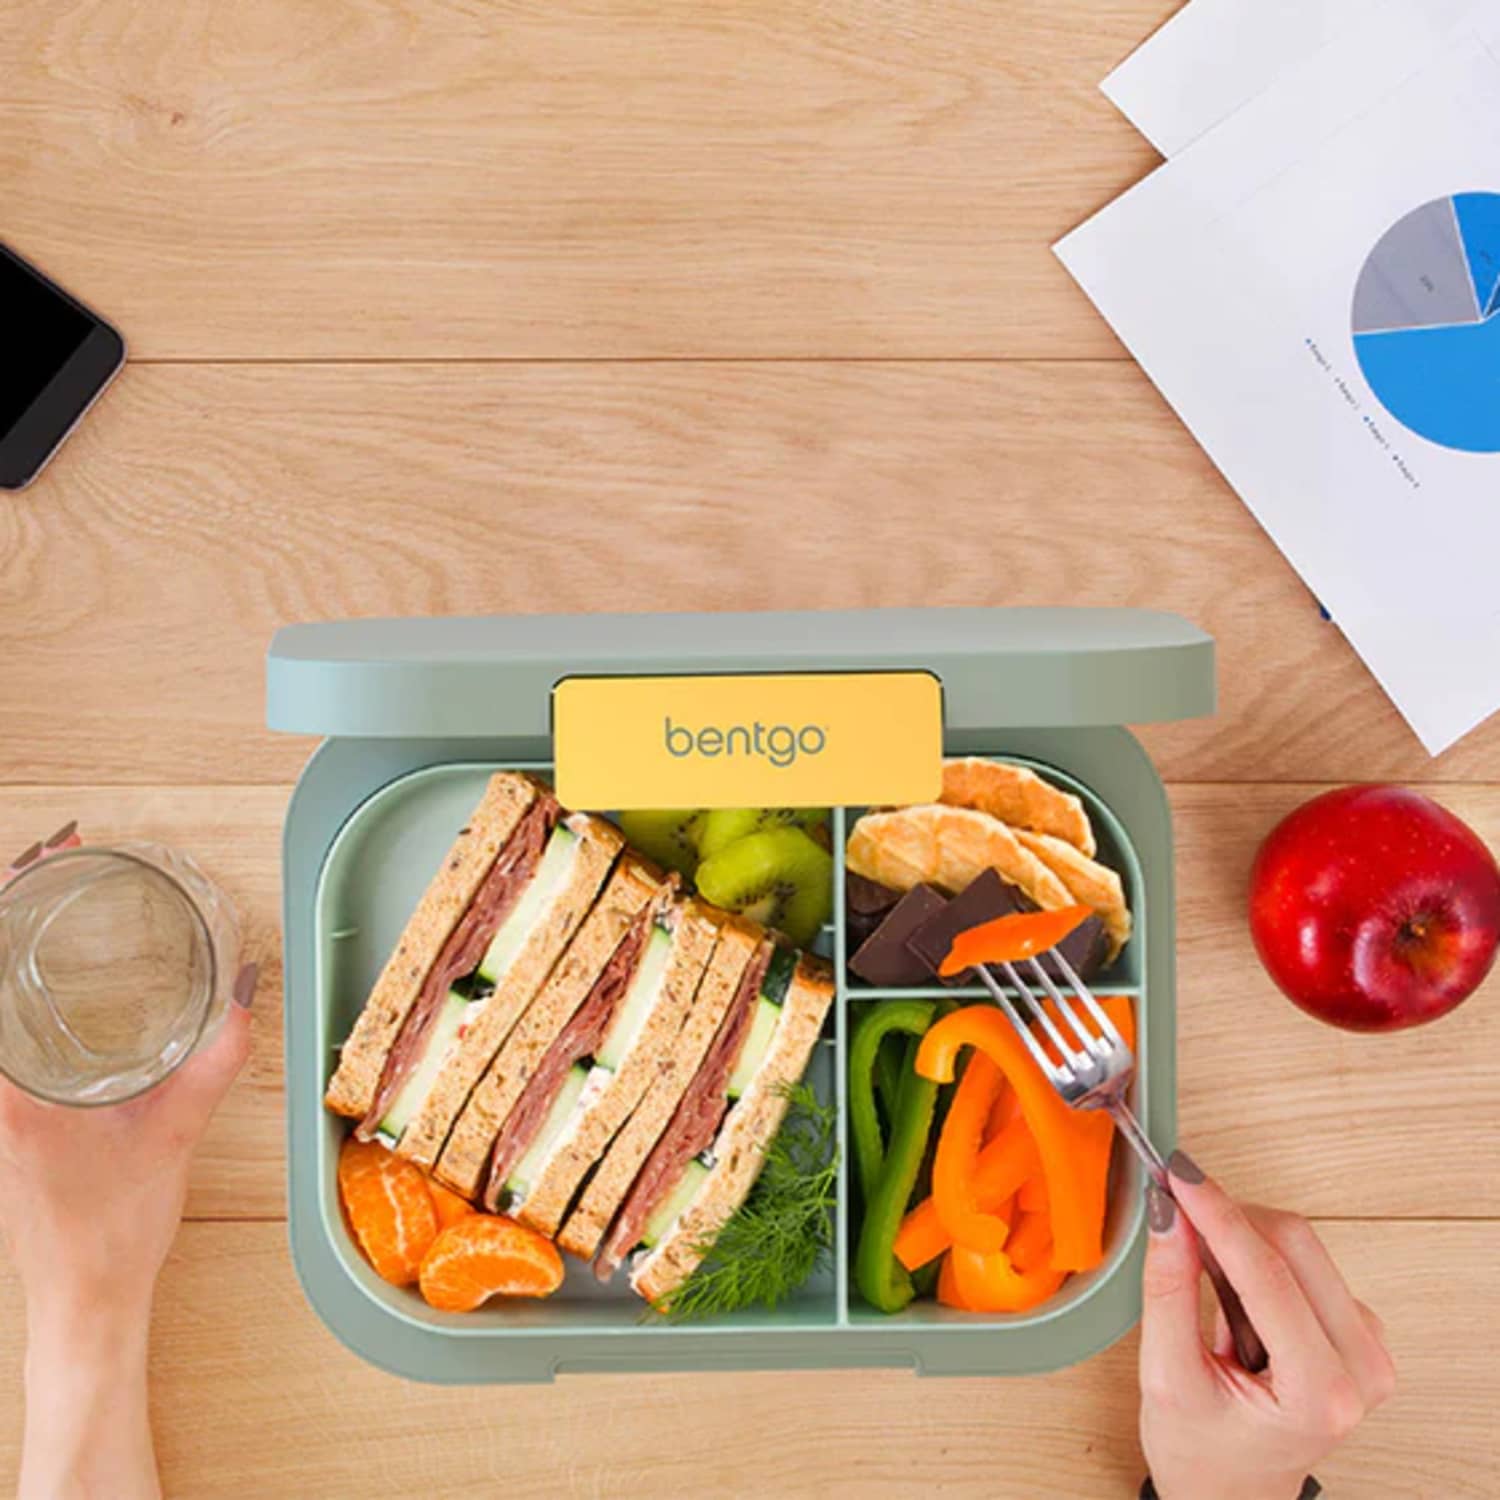 Bentgo Modern Bento-Style Lunch Box: Tried & Tested